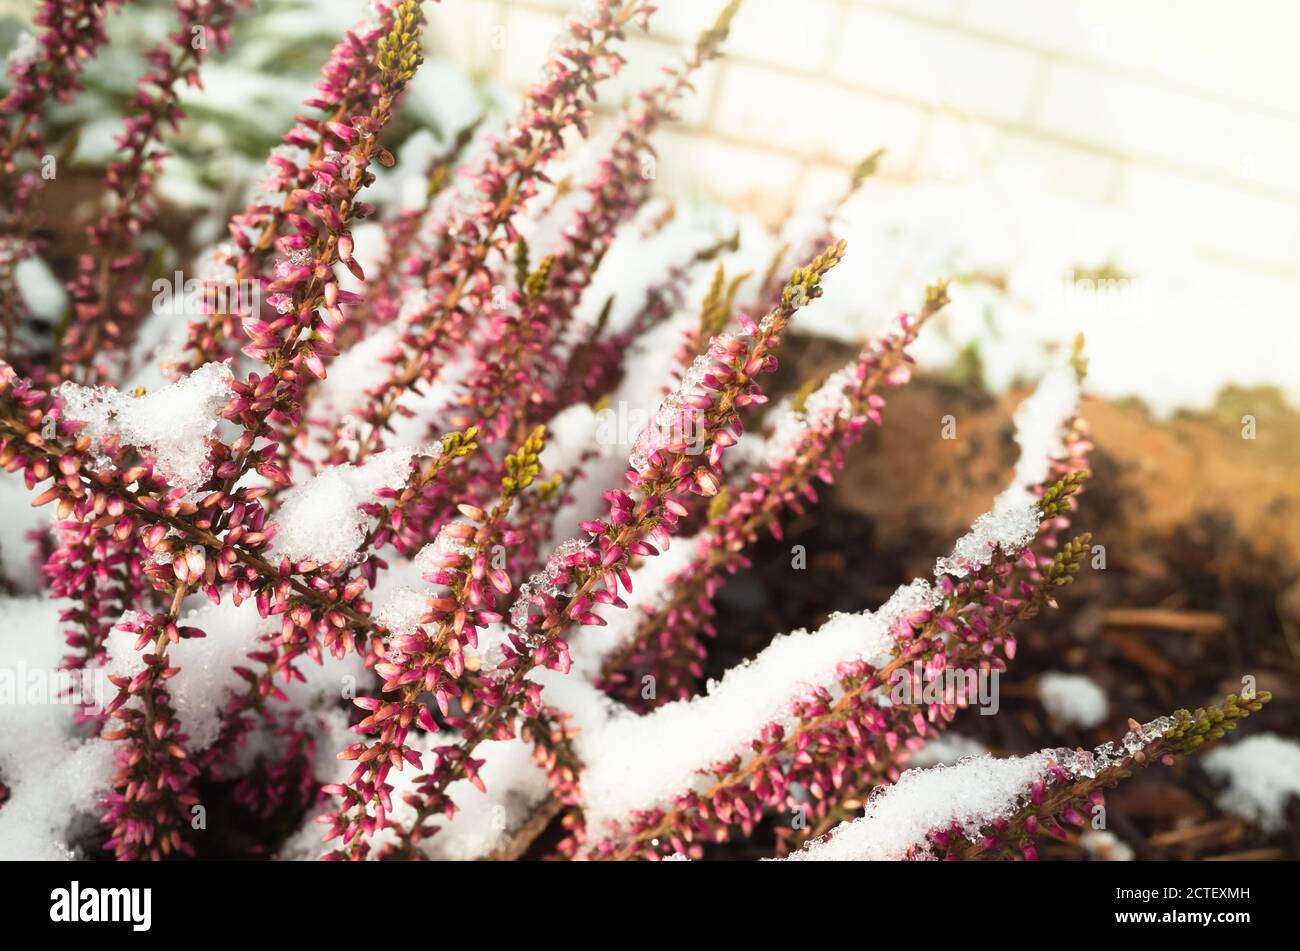 Heather flowers covered with snow, natural macro photo. Calluna vulgaris known as common heather, ling, or simply heather Stock Photo